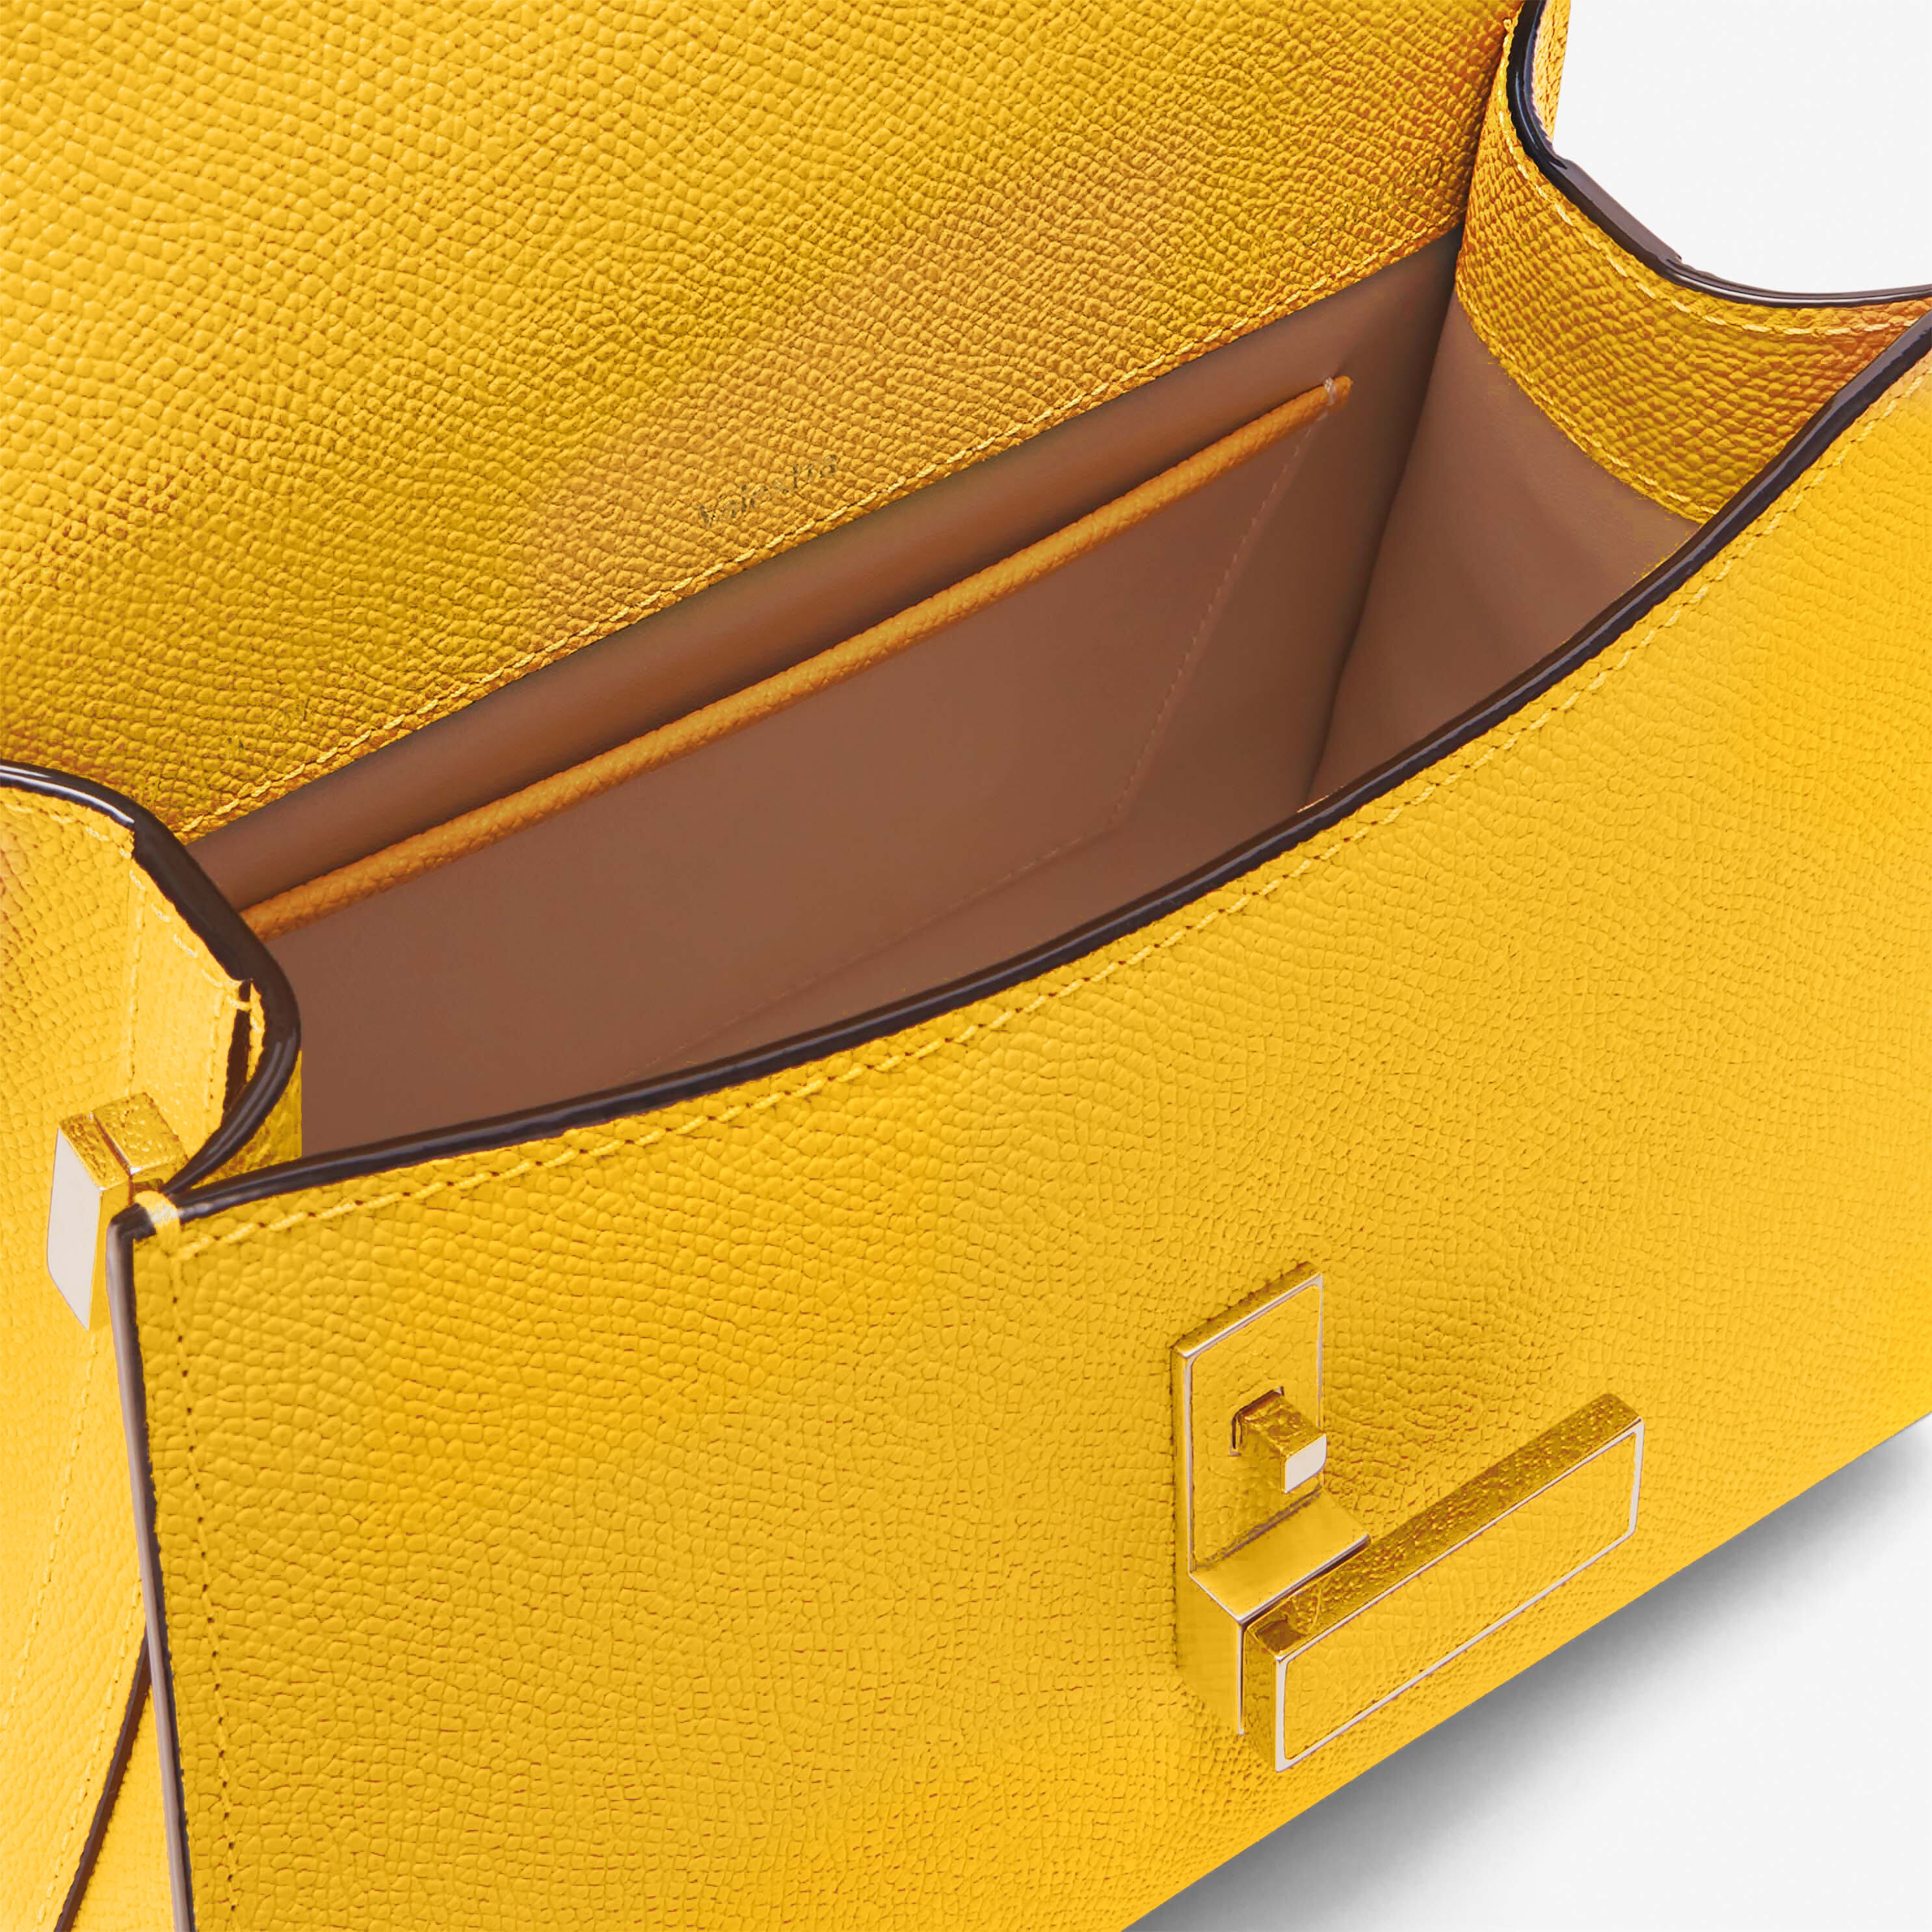 Italian leather handcrafted bags | Women and Men | Valextra